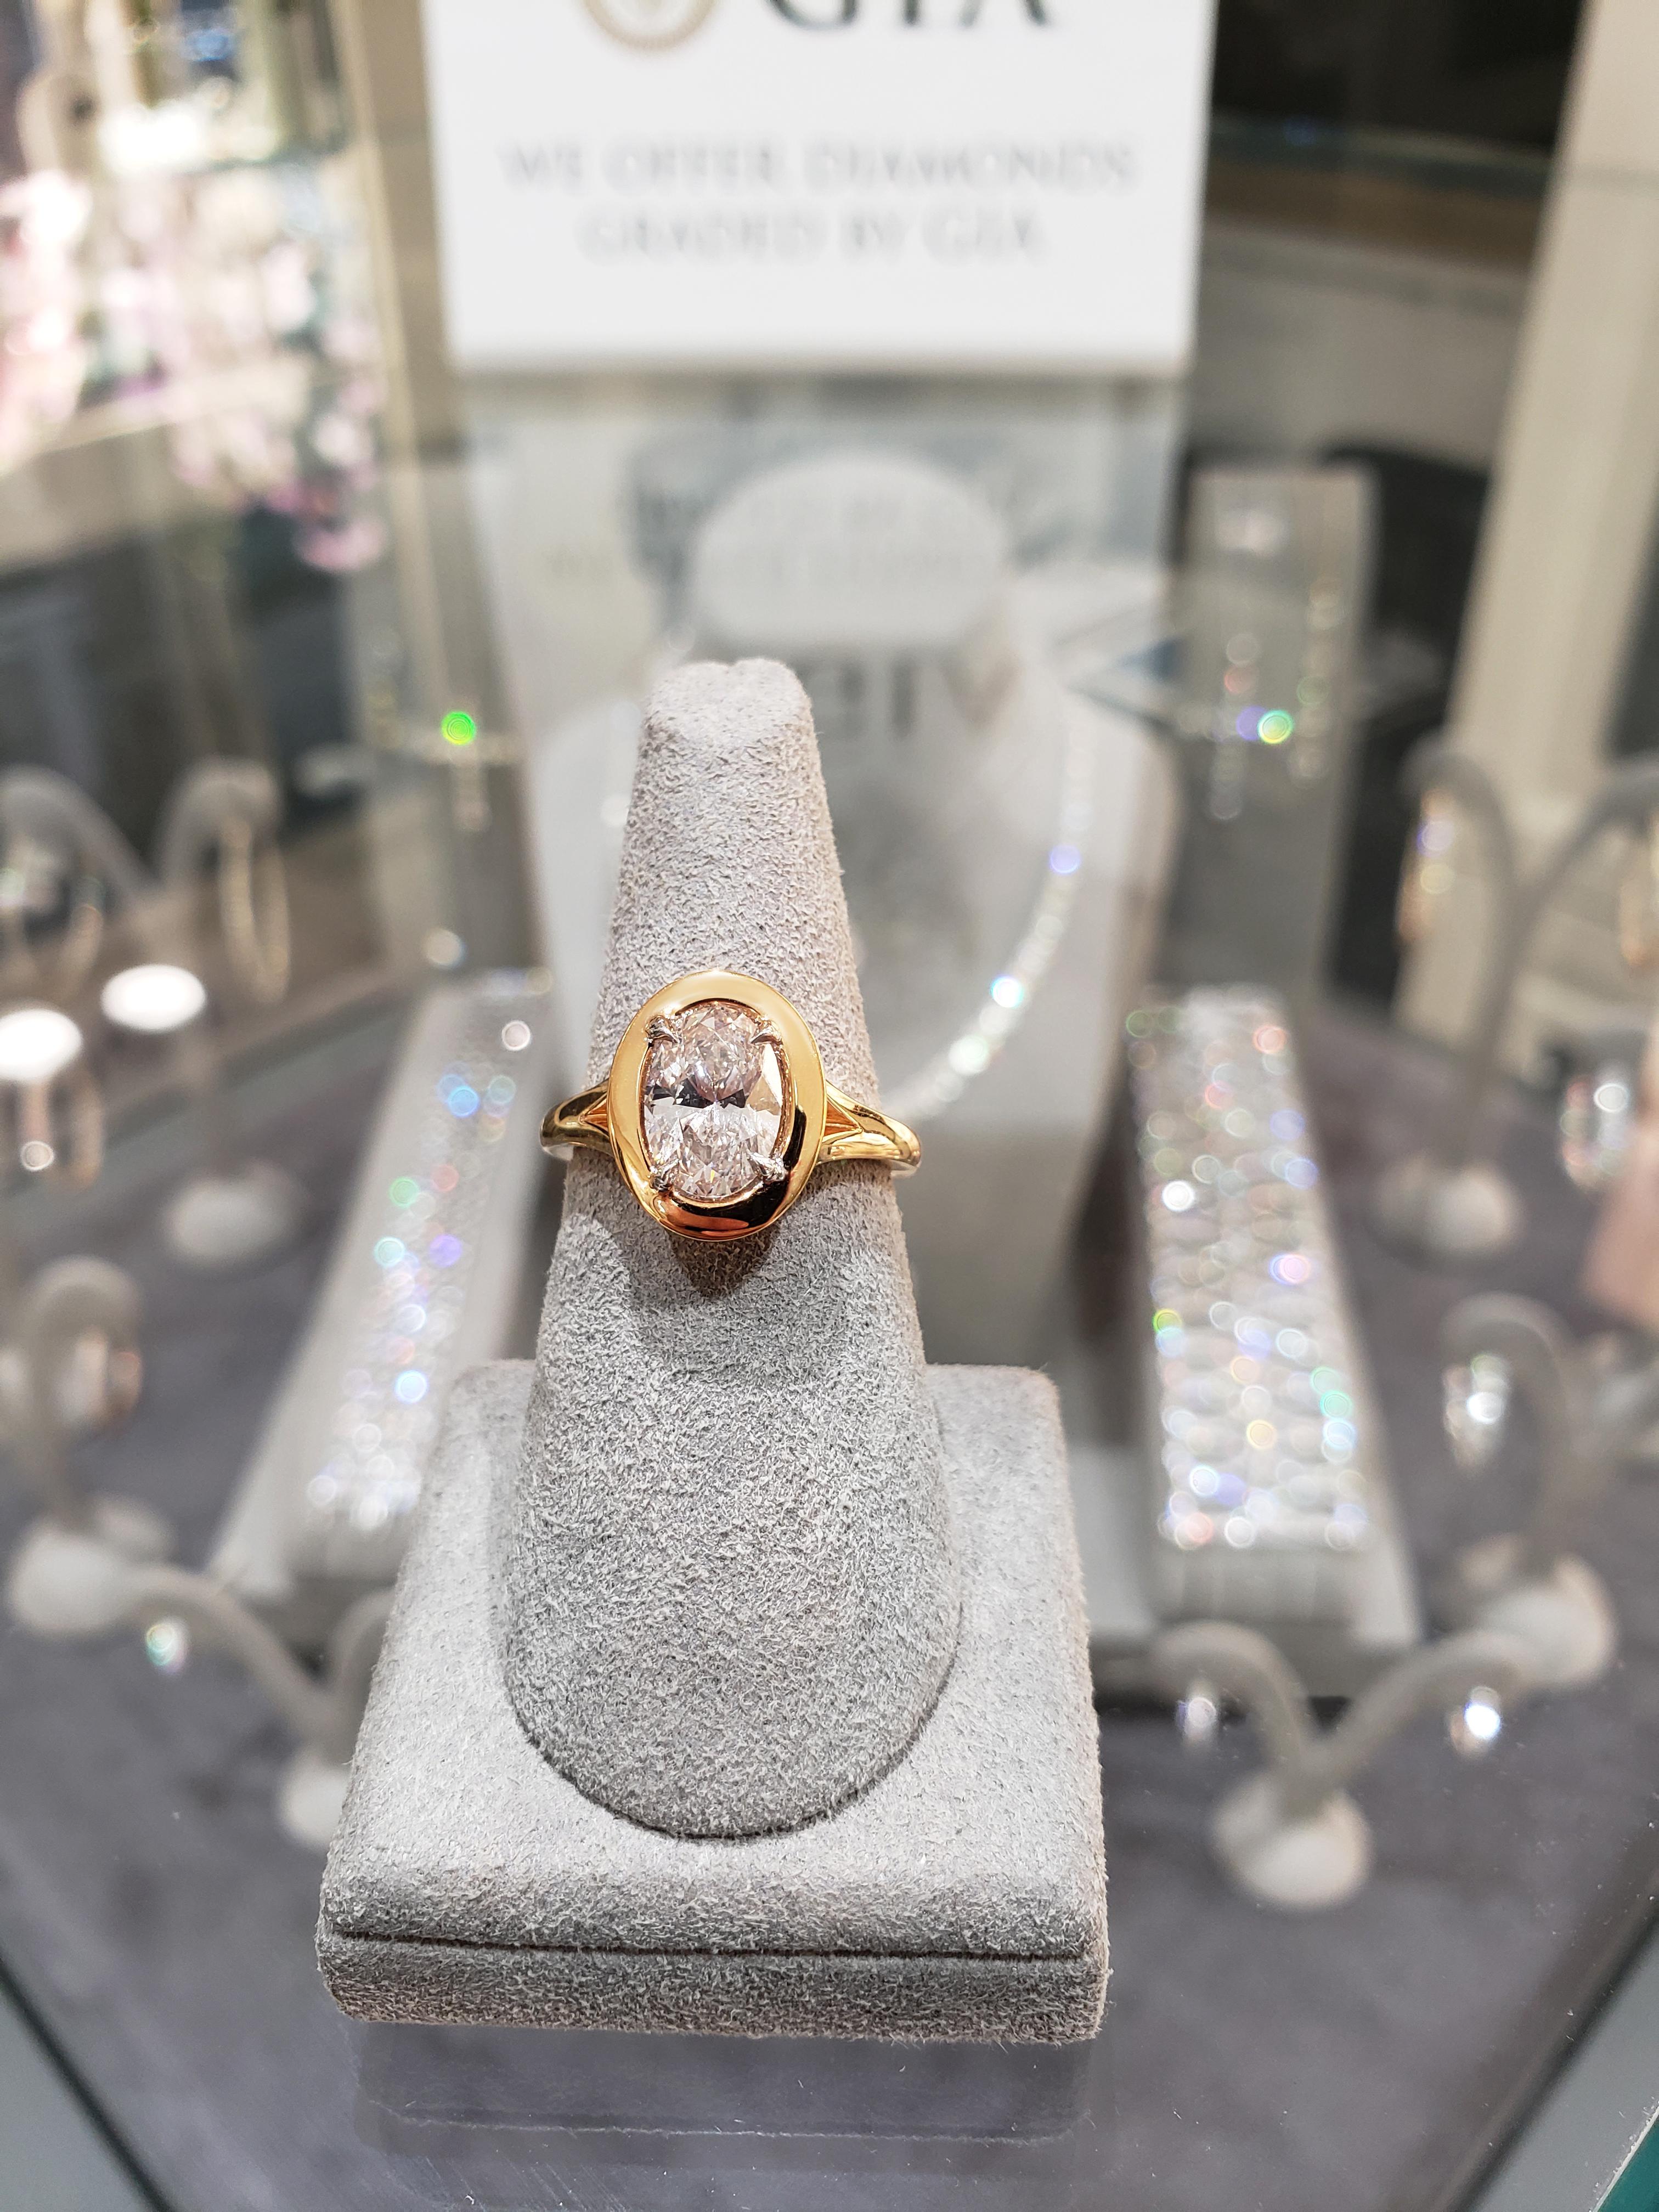 Features a 1.51 carat brown-tinted oval cut diamond center stone set in a polished rose gold bezel. Attached to a chic split-shank band made with 18 carat rose gold.

Style available in different price ranges. Prices are based on your selection of